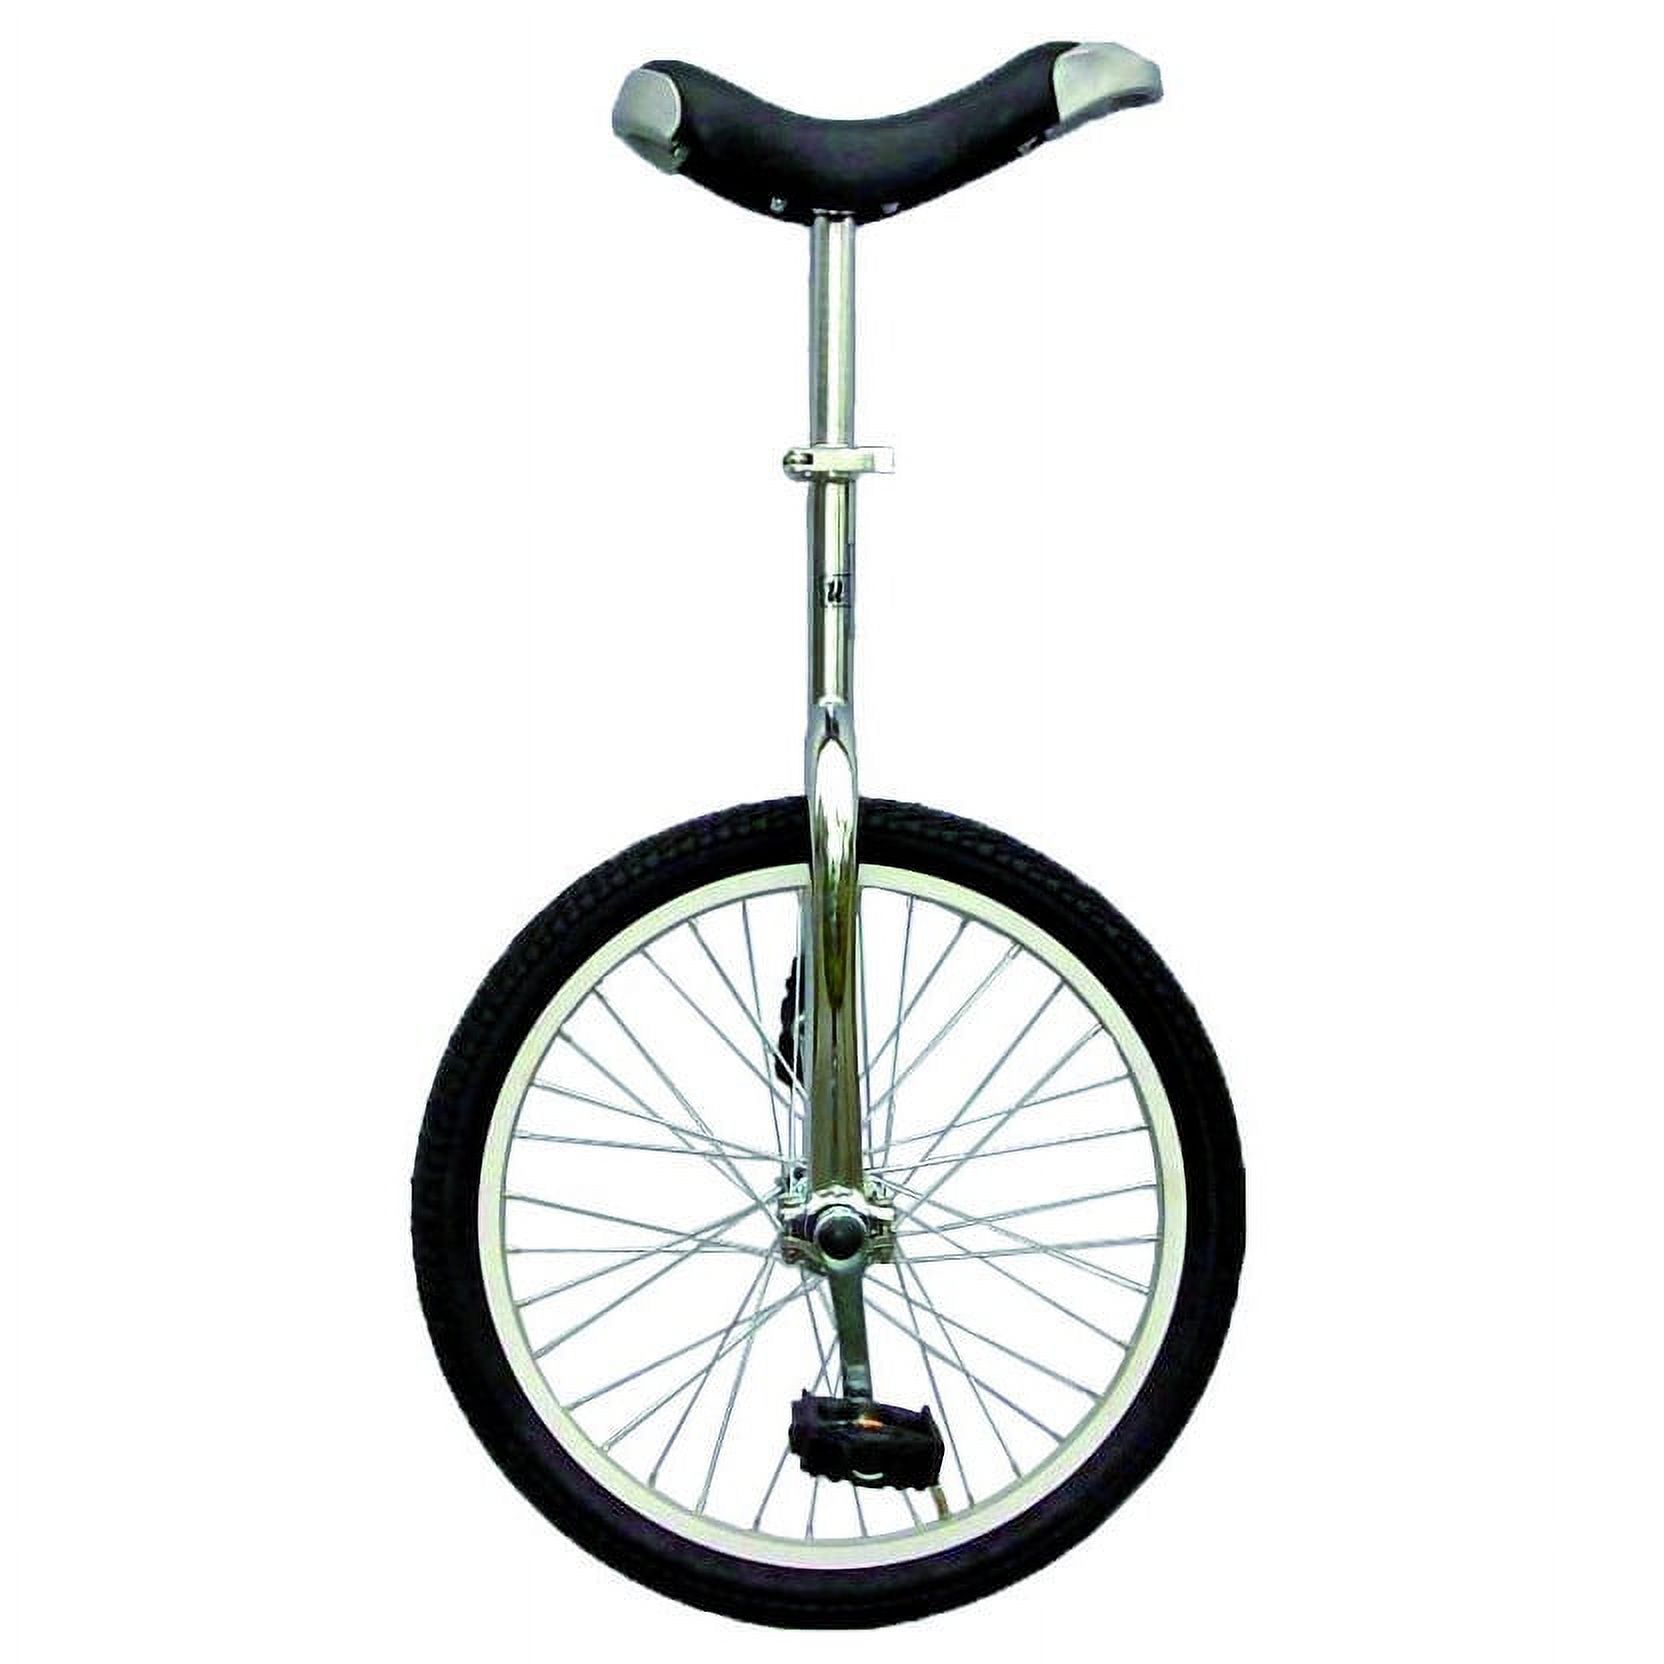 Fun 20 inch Unicycle with Alloy Rim, Chrome - image 1 of 5